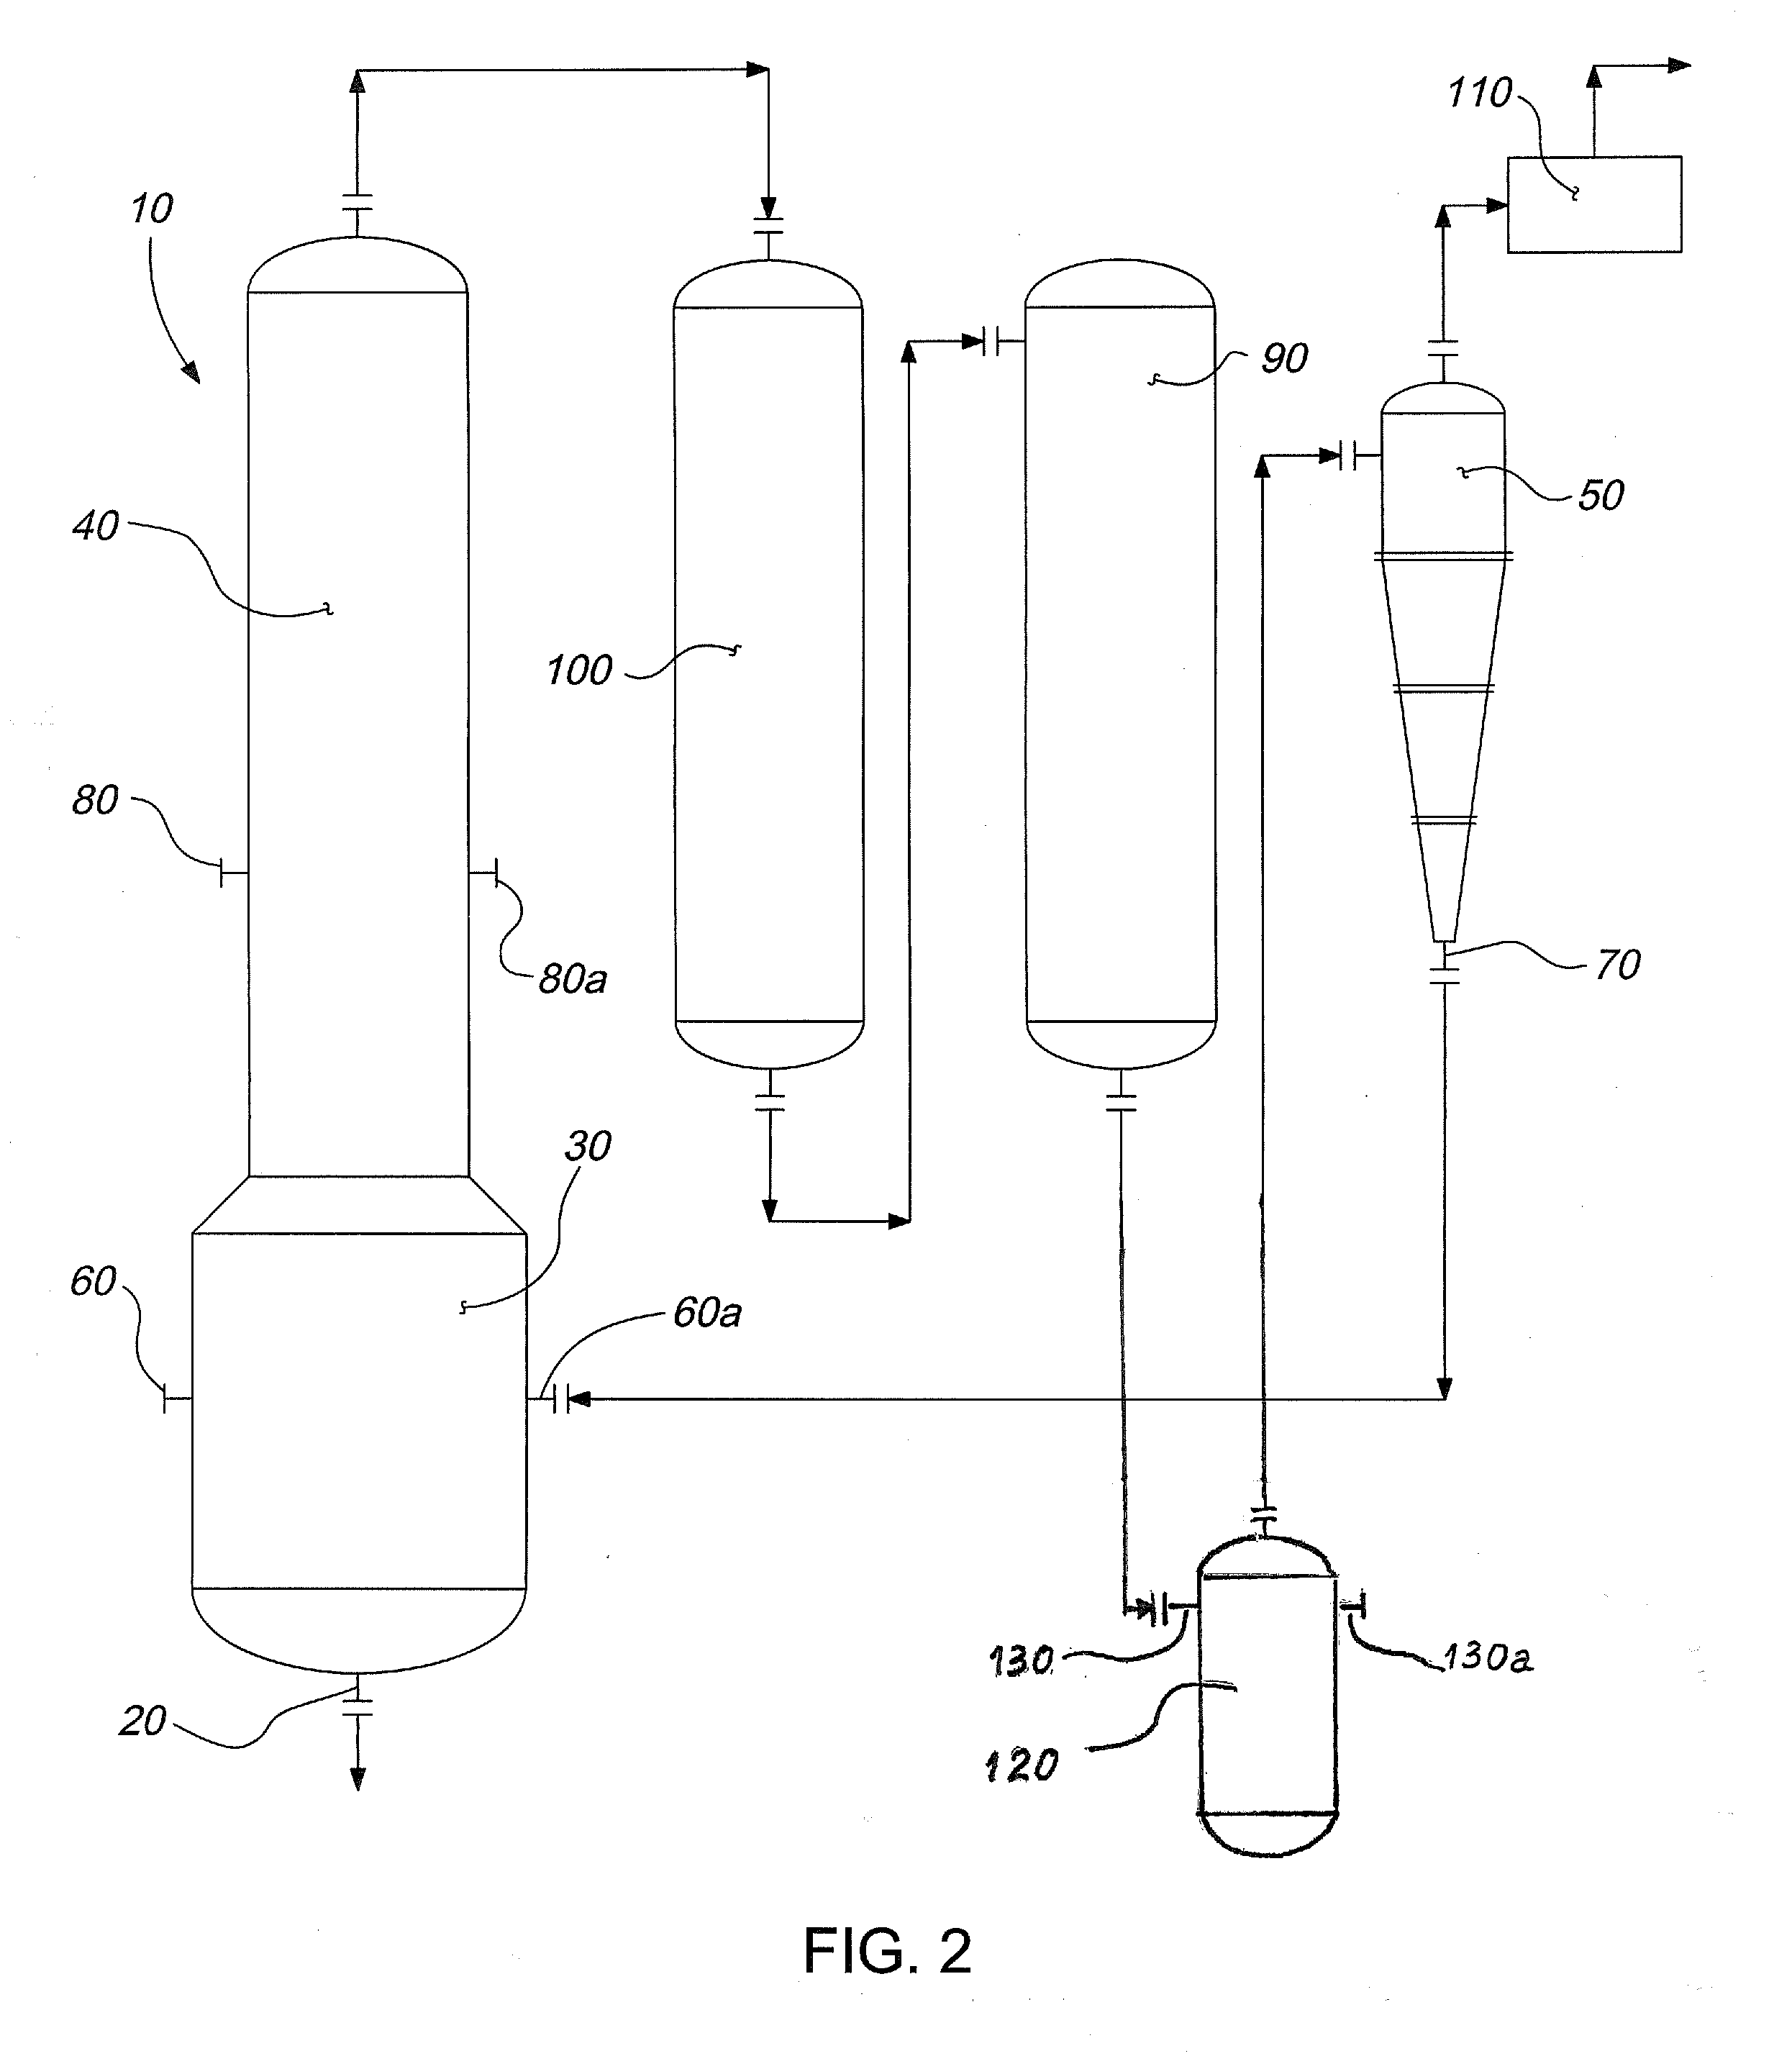 Gasification system and process with staged slurry addition